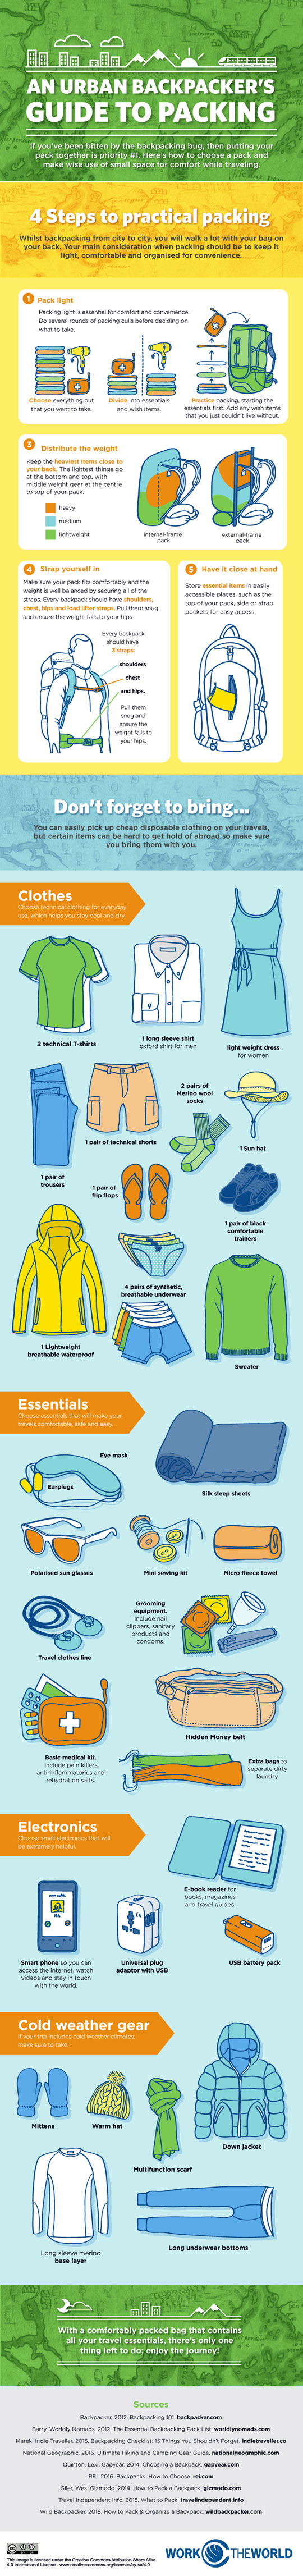 Backpackers-Guide-to-Packing